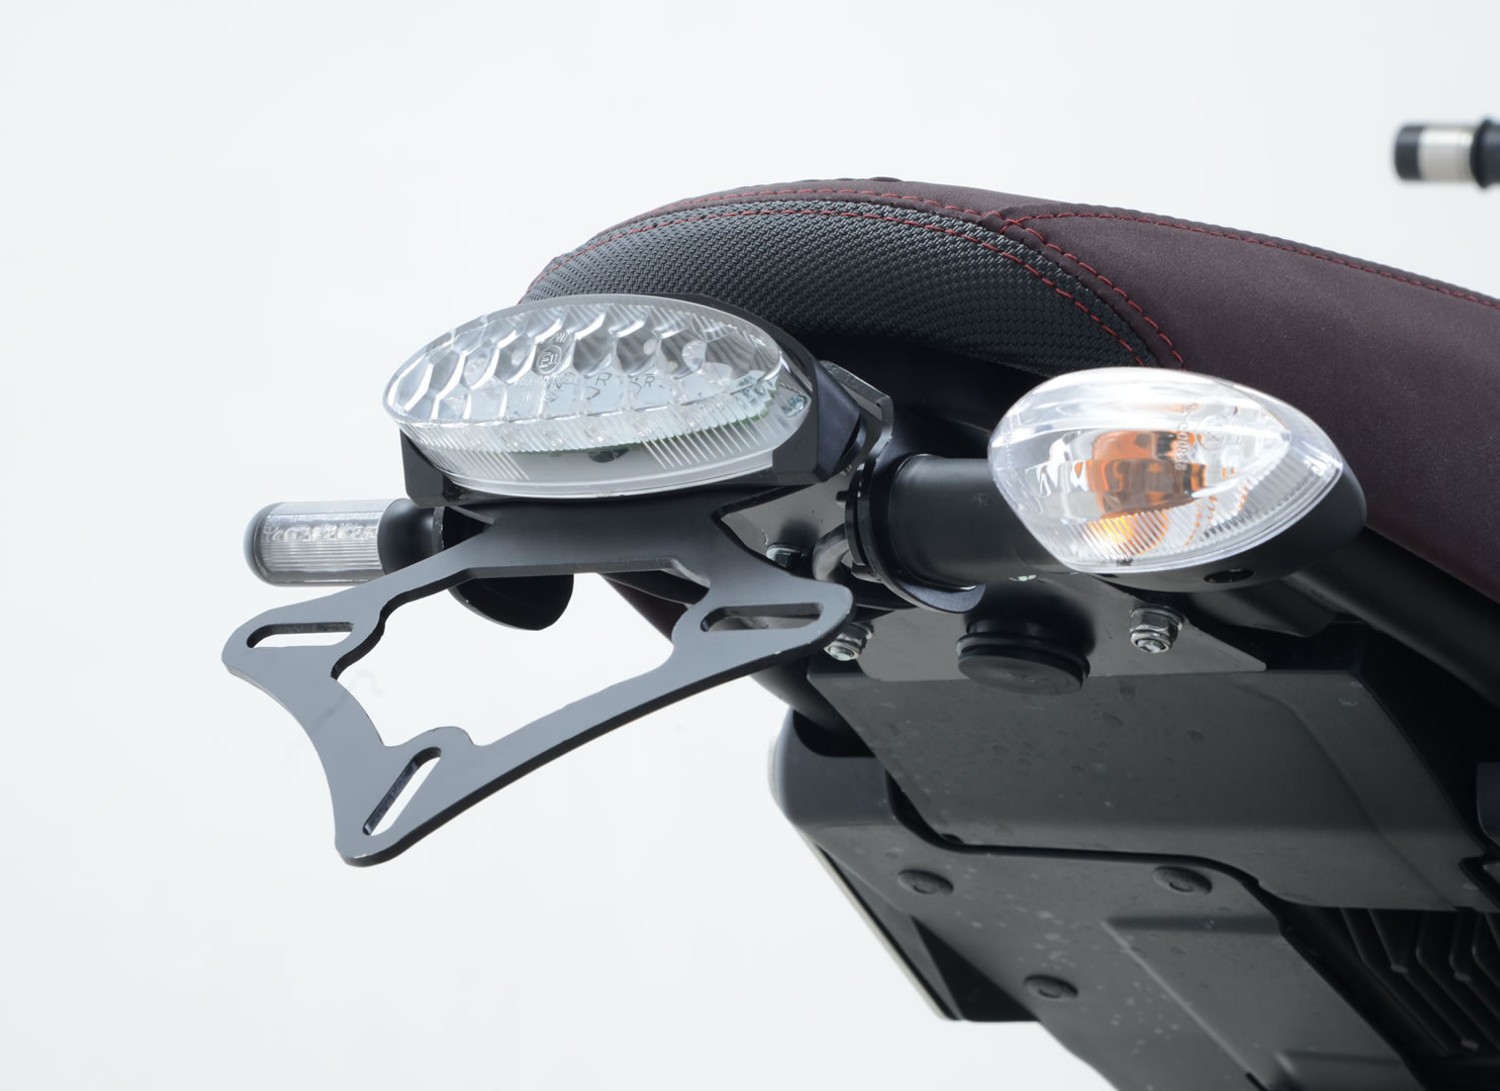 LED Light Included Yamaha XSR900 2015 - Aluminium Adjustable Inclination Plate Holder De Pretto Moto Accessories Kit License Plate DPM - 100% Made in Italy Easy to Install Matte Black V